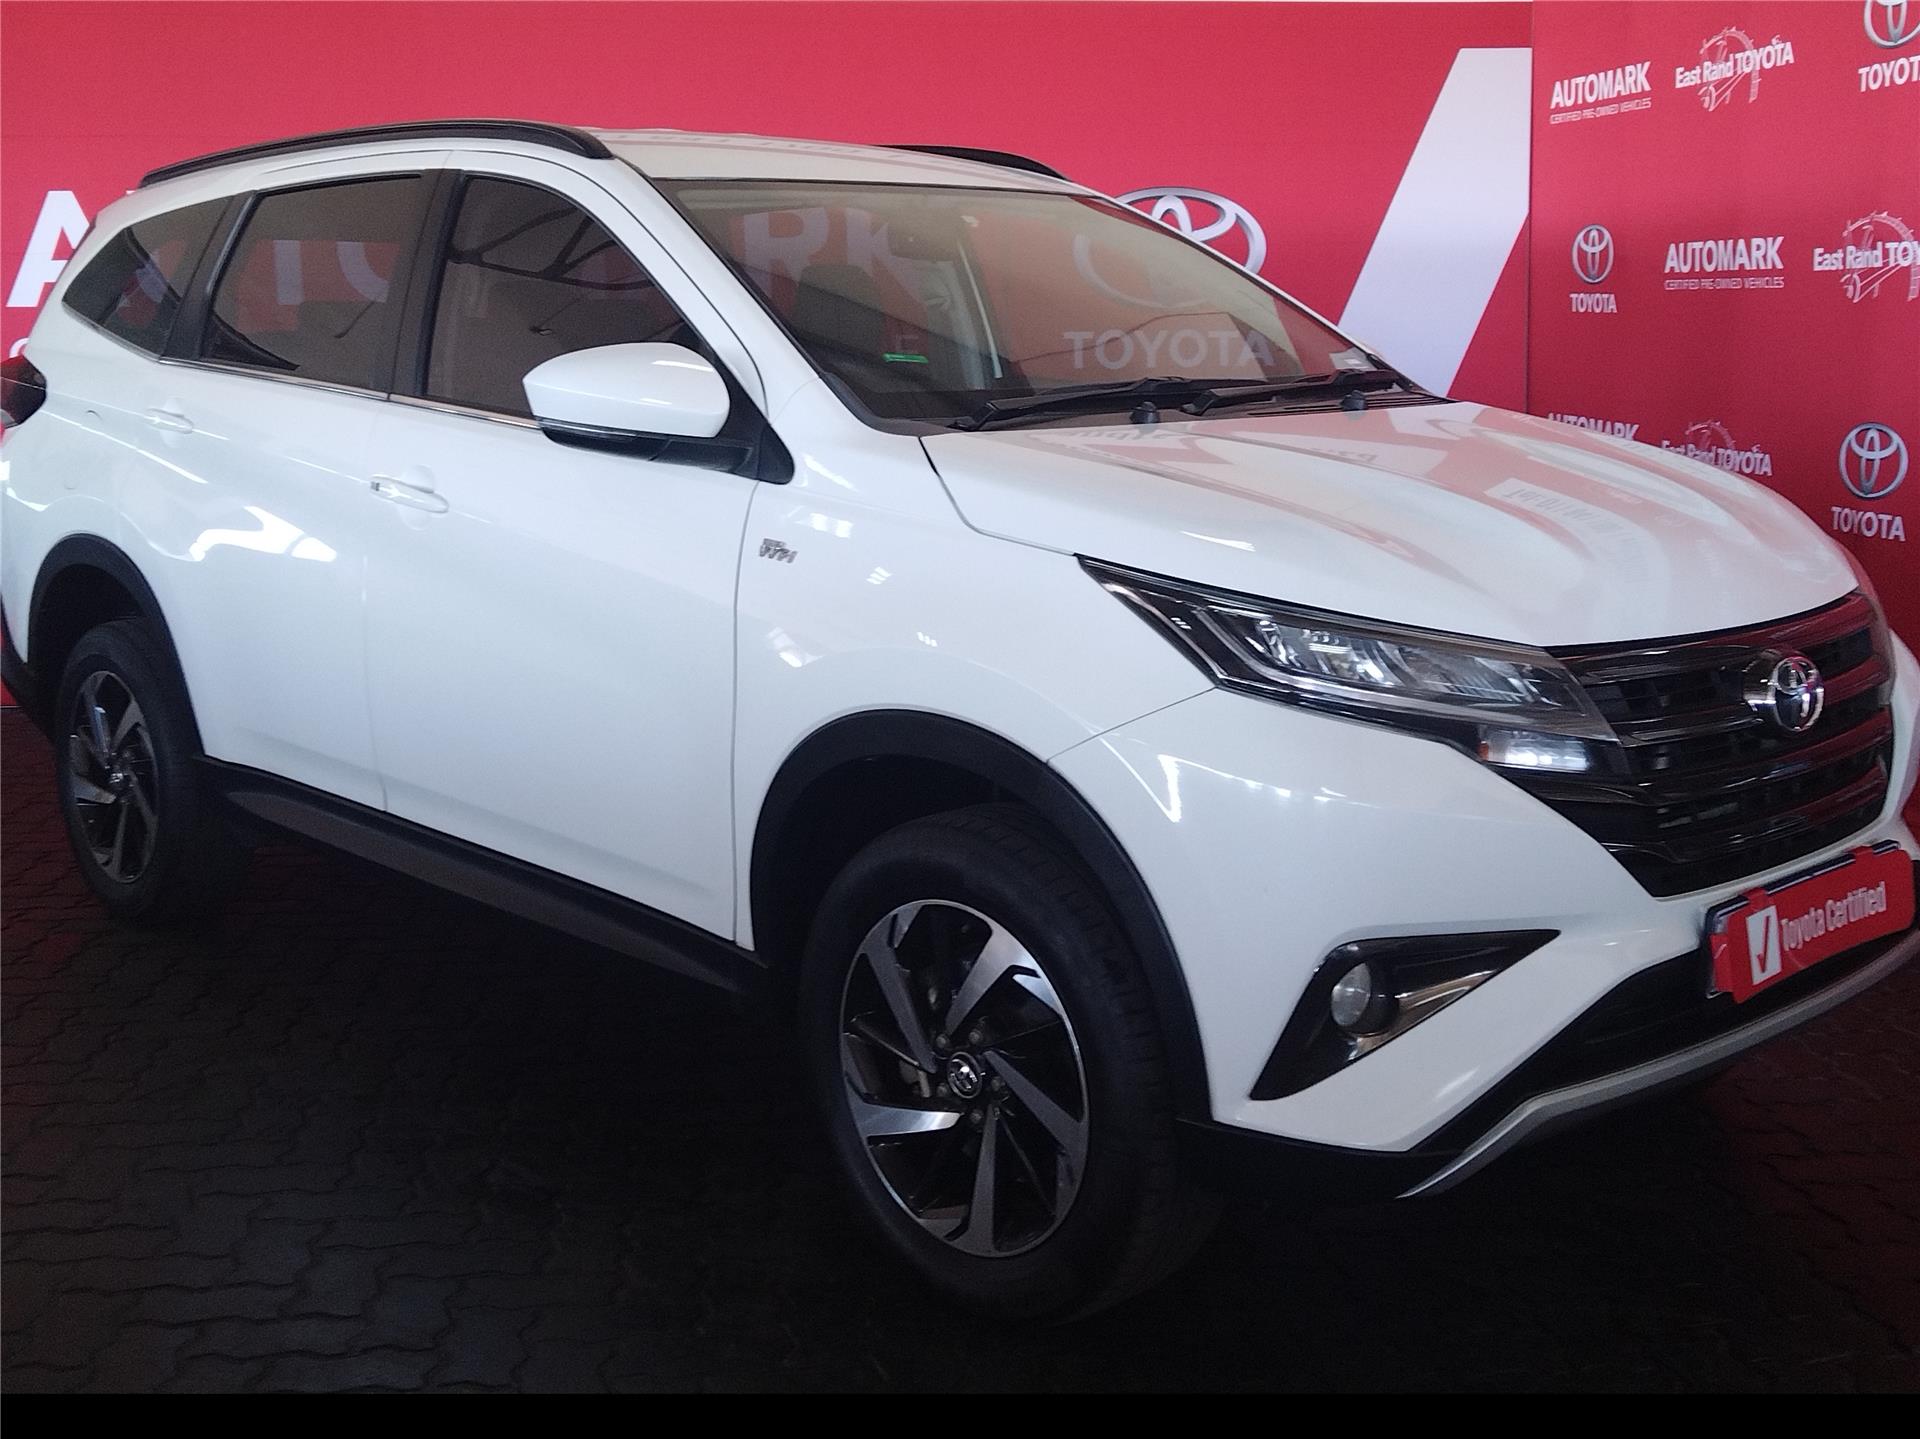 2019 Toyota Rush  for sale - 960424/1